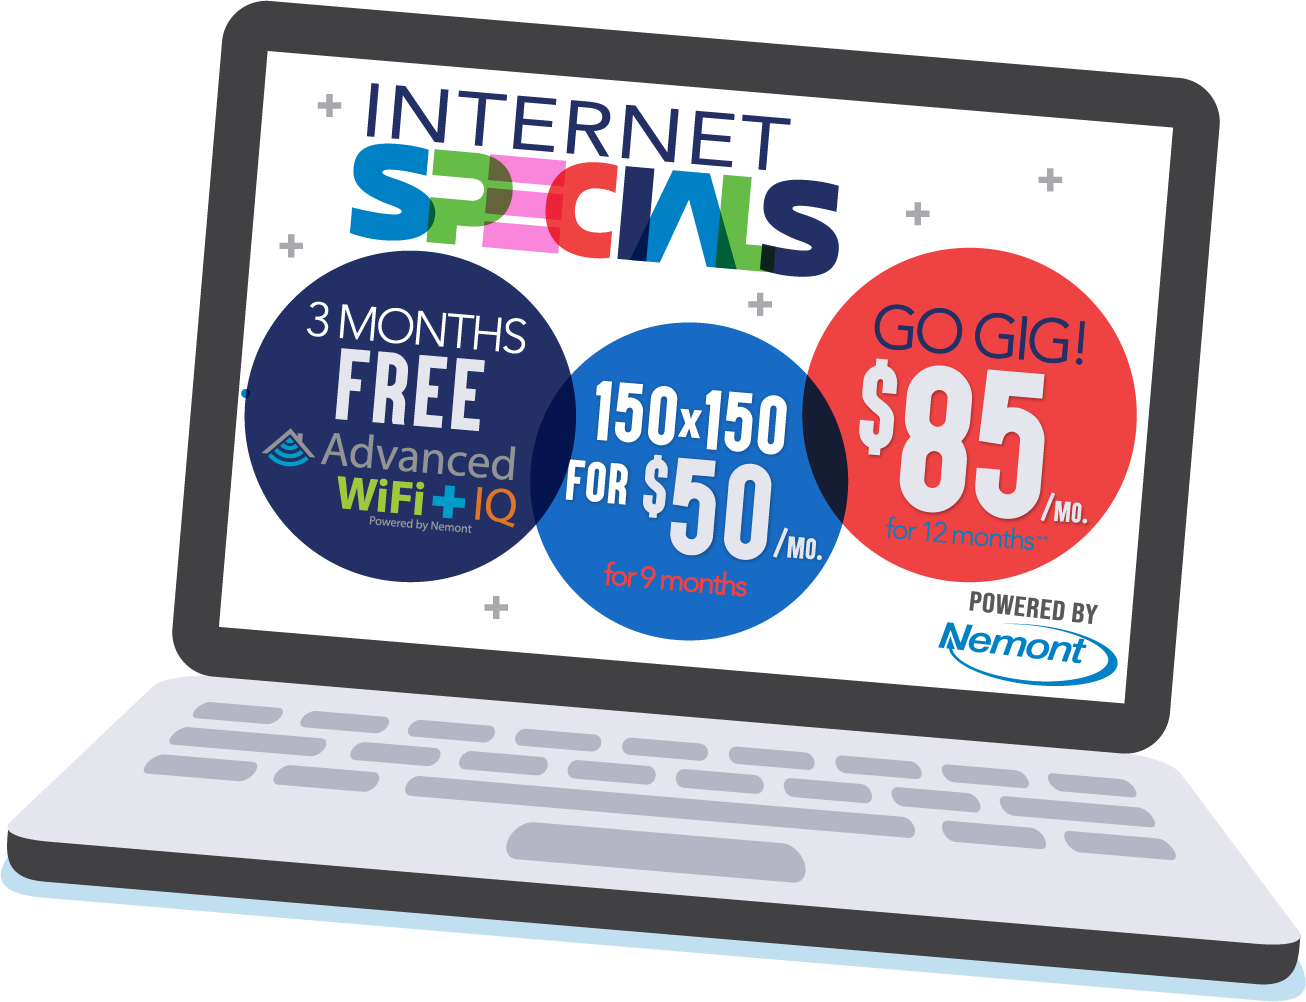 Check out our Internet specials!